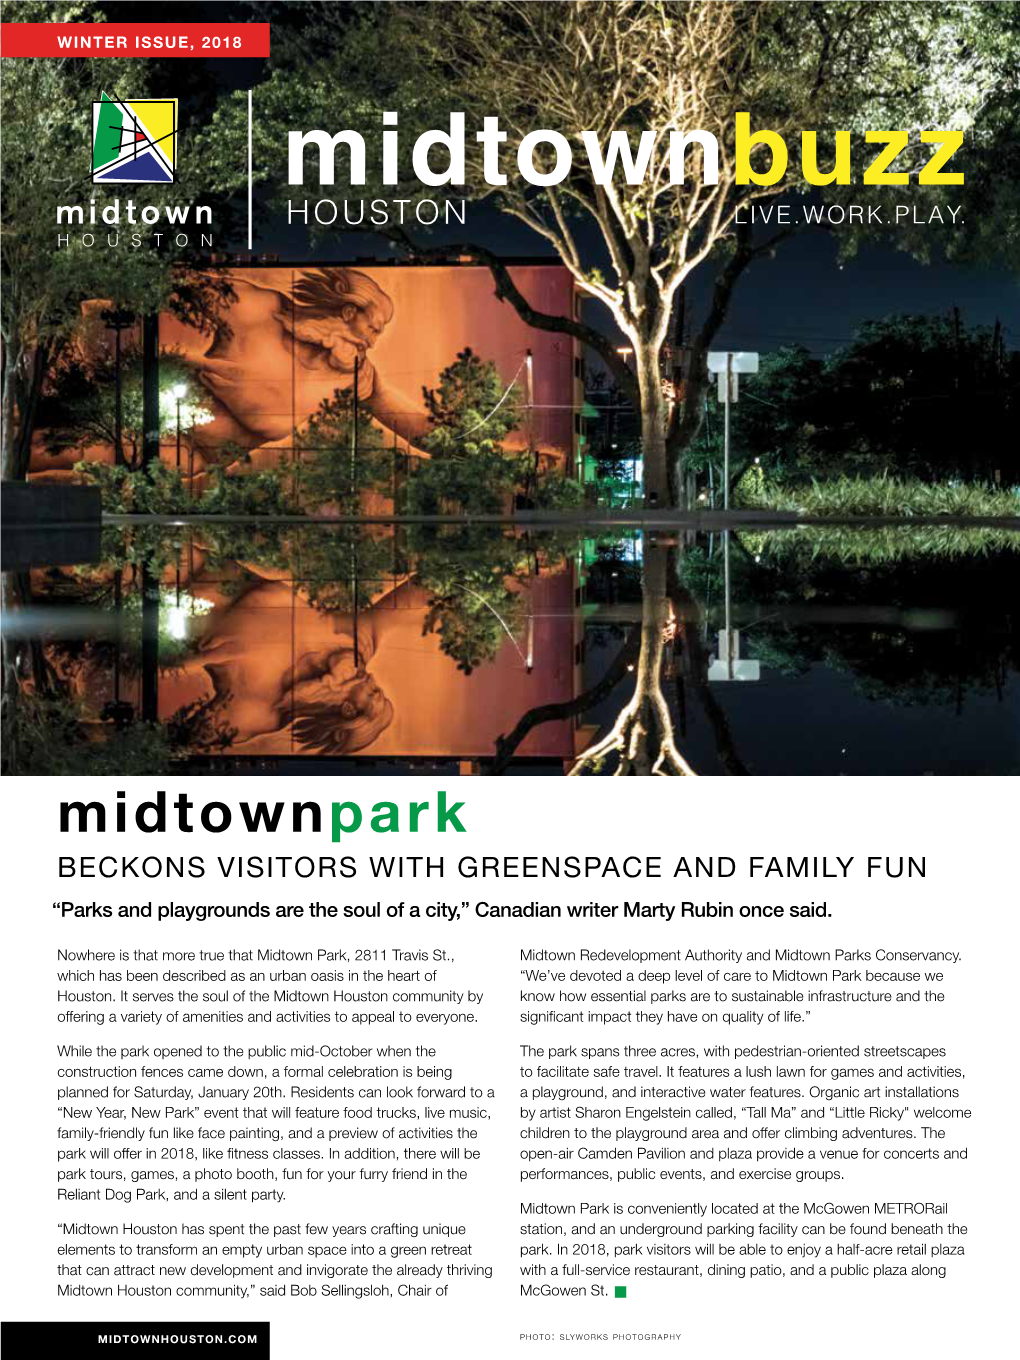 Midtownpark BECKONS VISITORS with GREENSPACE and FAMILY FUN “Parks and Playgrounds Are the Soul of a City,” Canadian Writer Marty Rubin Once Said